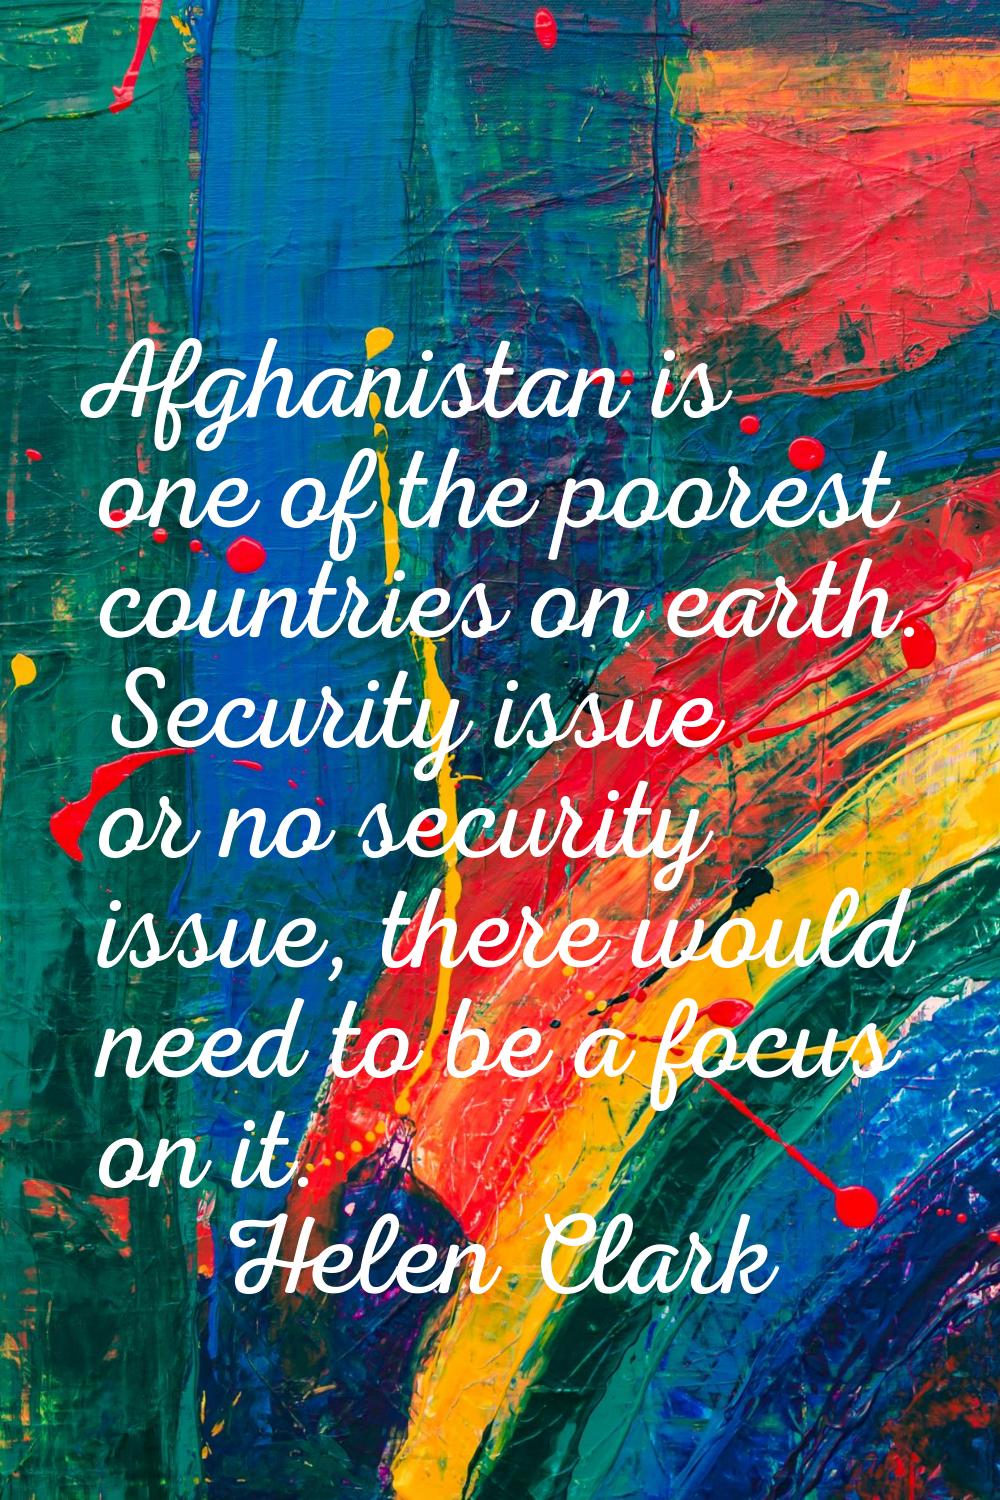 Afghanistan is one of the poorest countries on earth. Security issue or no security issue, there wo